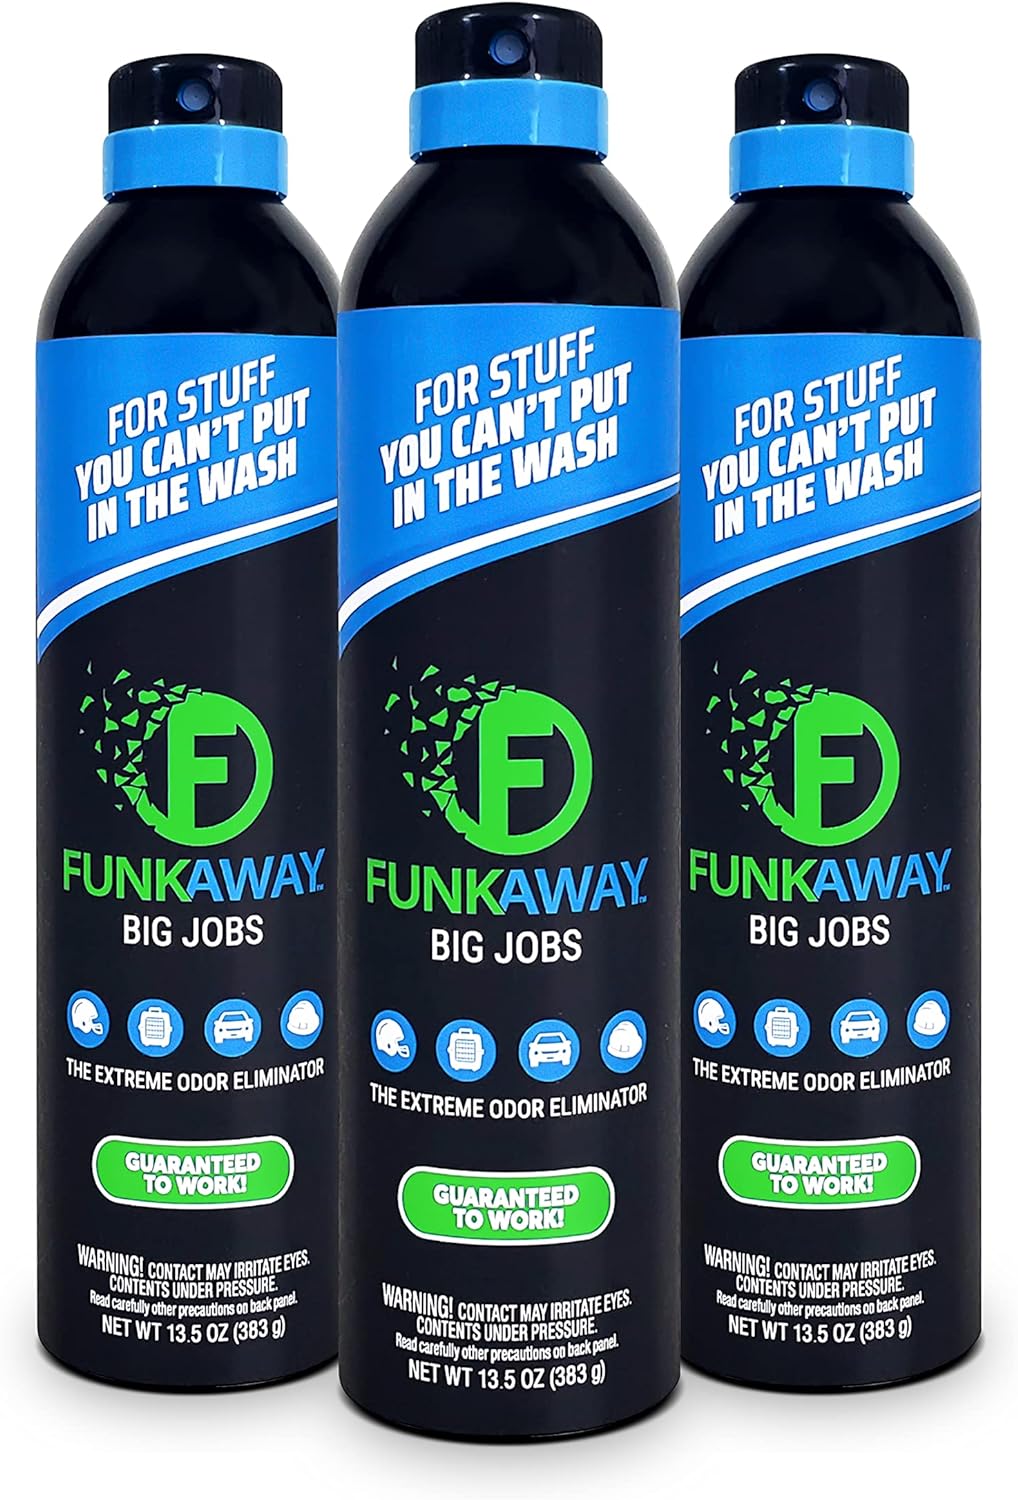 FunkAway Big Jobs Aerosol Spray, 13.5 oz., 3 Pack, Extreme Odor Eliminator Spray, Ideal for Shoe Smells, Pet Odors and Large Stuff that Won't Fit in the Wash; Attacks Musty Odors at the Source